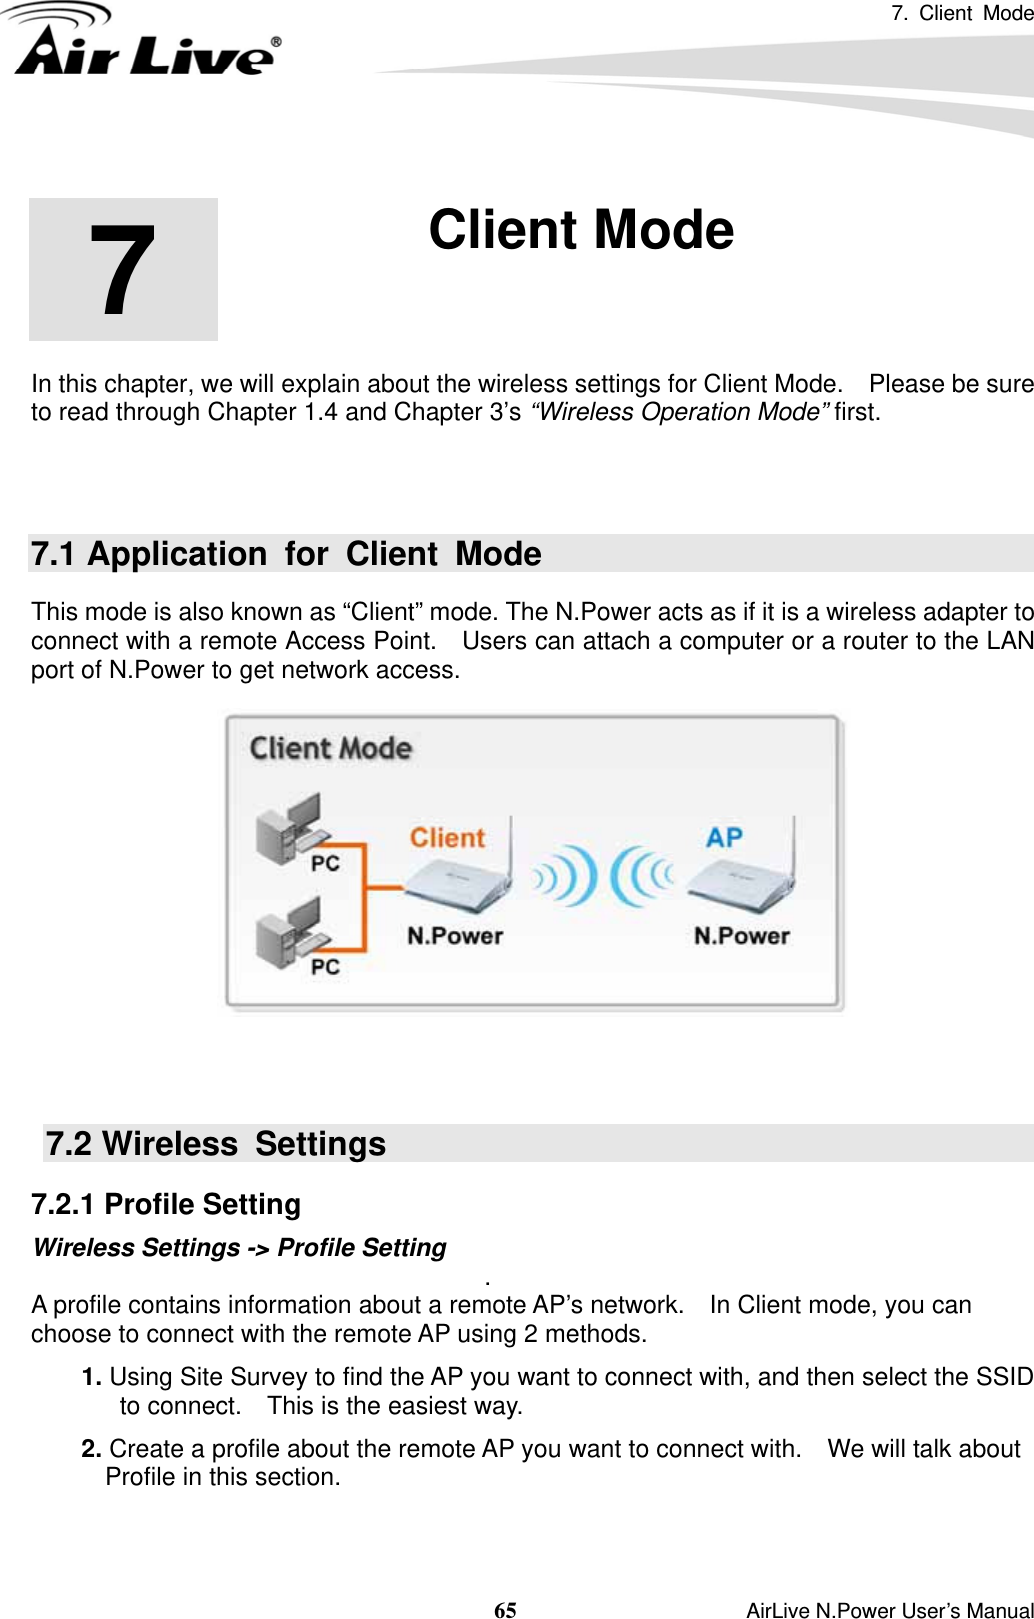 7. Client Mode  65                    AirLive N.Power User’s Manual        In this chapter, we will explain about the wireless settings for Client Mode.    Please be sure to read through Chapter 1.4 and Chapter 3’s “Wireless Operation Mode” first.   7.1 Application for Client Mode This mode is also known as “Client” mode. The N.Power acts as if it is a wireless adapter to connect with a remote Access Point.    Users can attach a computer or a router to the LAN port of N.Power to get network access.        7.2 Wireless  Settings 7.2.1 Profile Setting Wireless Settings -&gt; Profile Setting  . A profile contains information about a remote AP’s network.    In Client mode, you can choose to connect with the remote AP using 2 methods.  1. Using Site Survey to find the AP you want to connect with, and then select the SSID to connect.    This is the easiest way.  2. Create a profile about the remote AP you want to connect with.    We will talk about Profile in this section.     7  7. Client Mode  